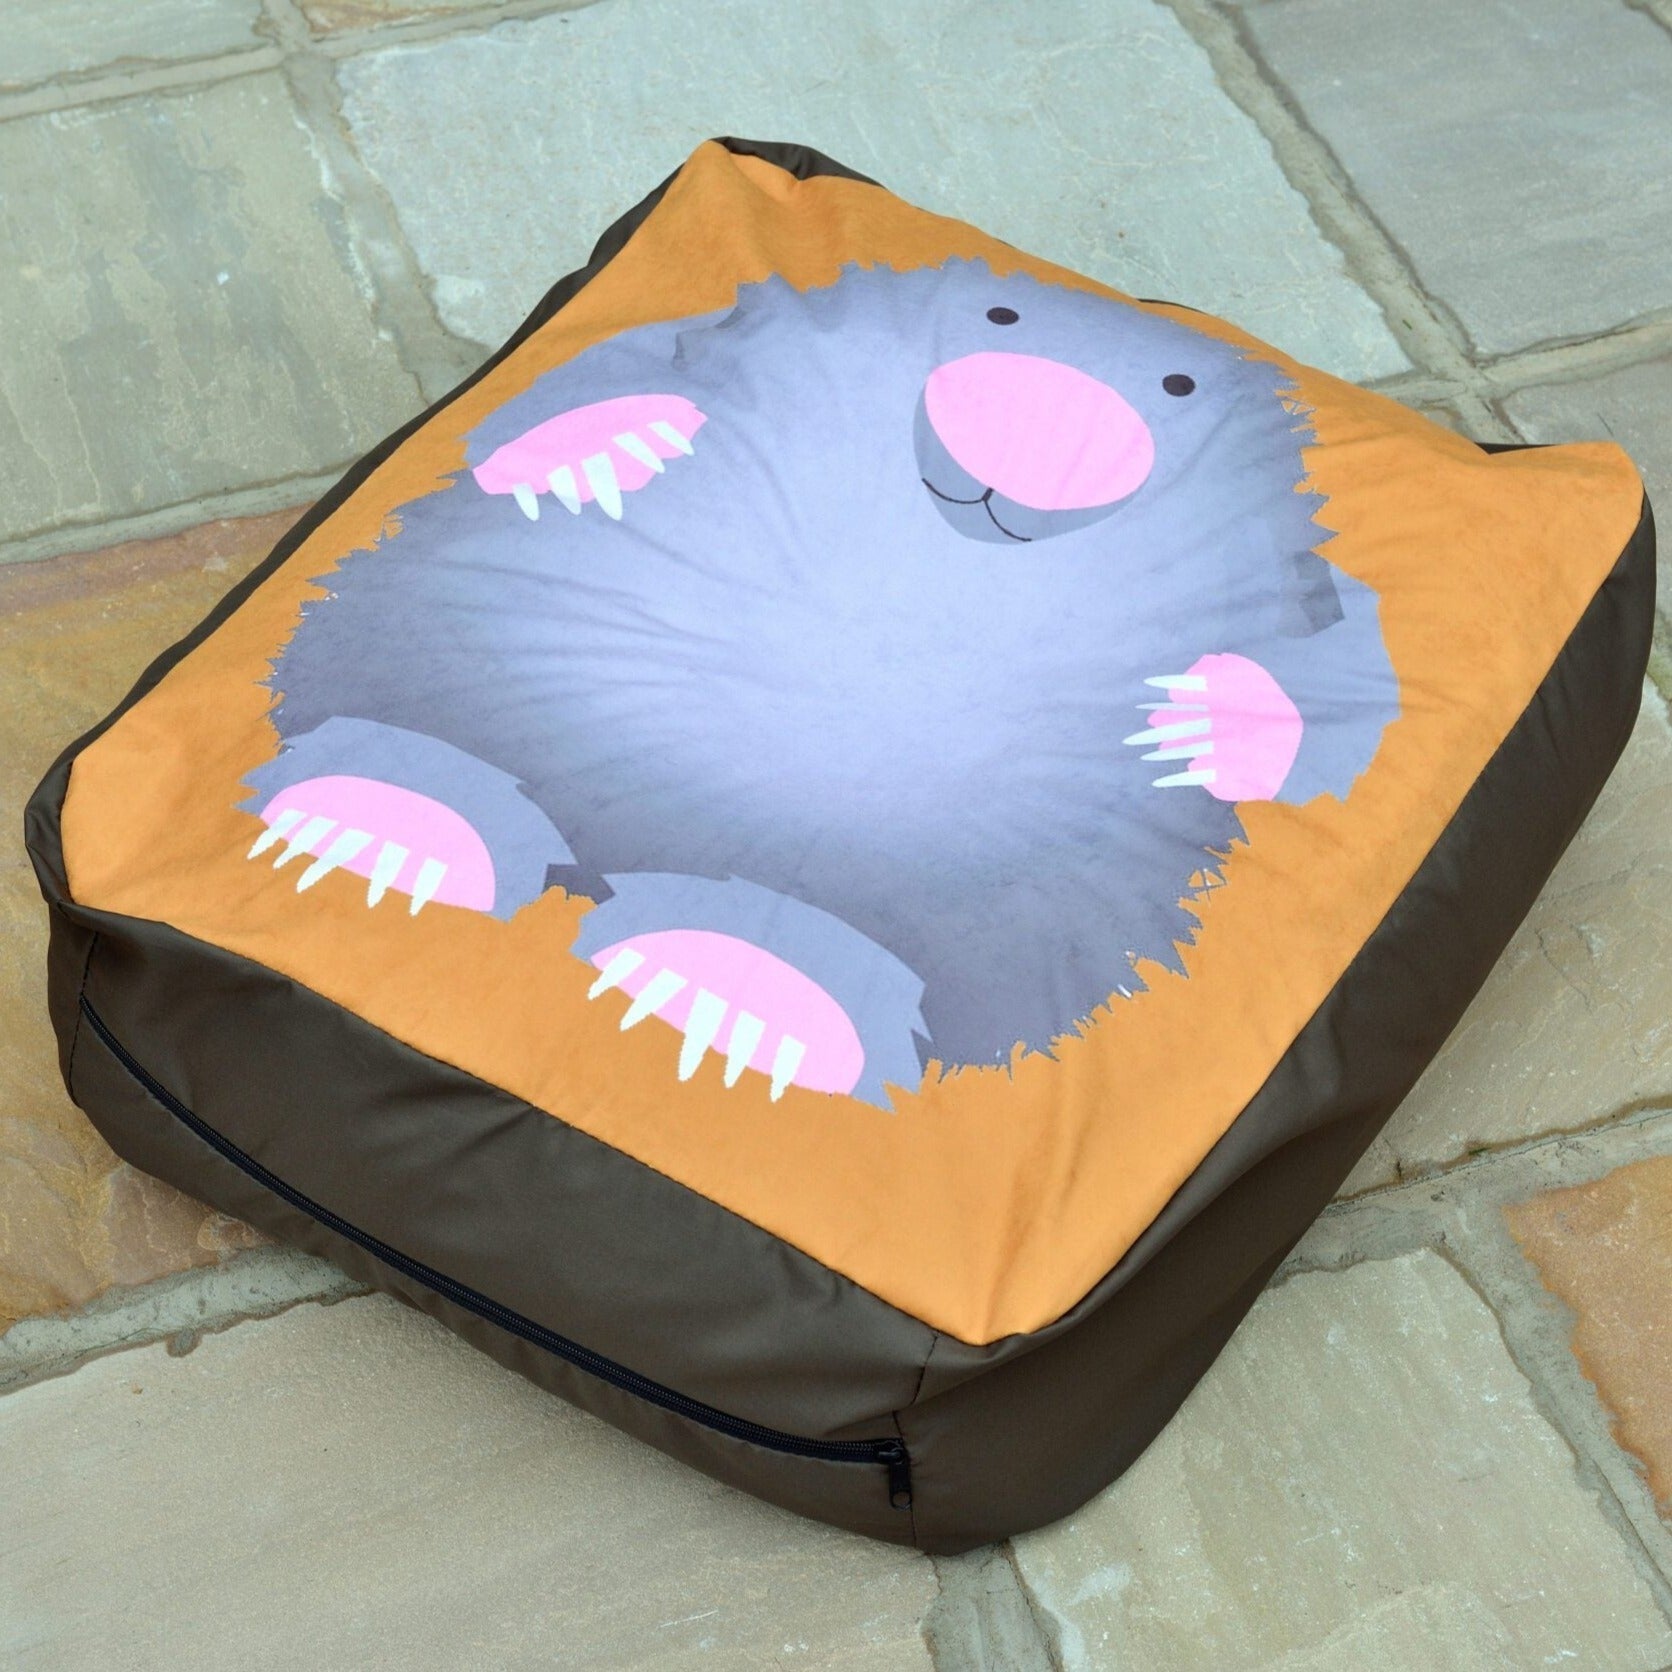 Mole Outdoor and Indoor Bean Cushion, The Mole Outdoor and Indoor Bean Cushion is perfect for use both indoors and outdoors depicting a quirky Mole print. Part of the Woodland Creatures Range which also includes Fox, Badger and Mole prints. Top-quality UK manufacturing with high grade fabrics this cushion is durable and can withstand rigorous use. Made from Nylon and Polyester which can be sponged clean with soapy water or the outer fabric removed for washing at 40°C. Mole Outdoor and Indoor Bean Cushion Mo